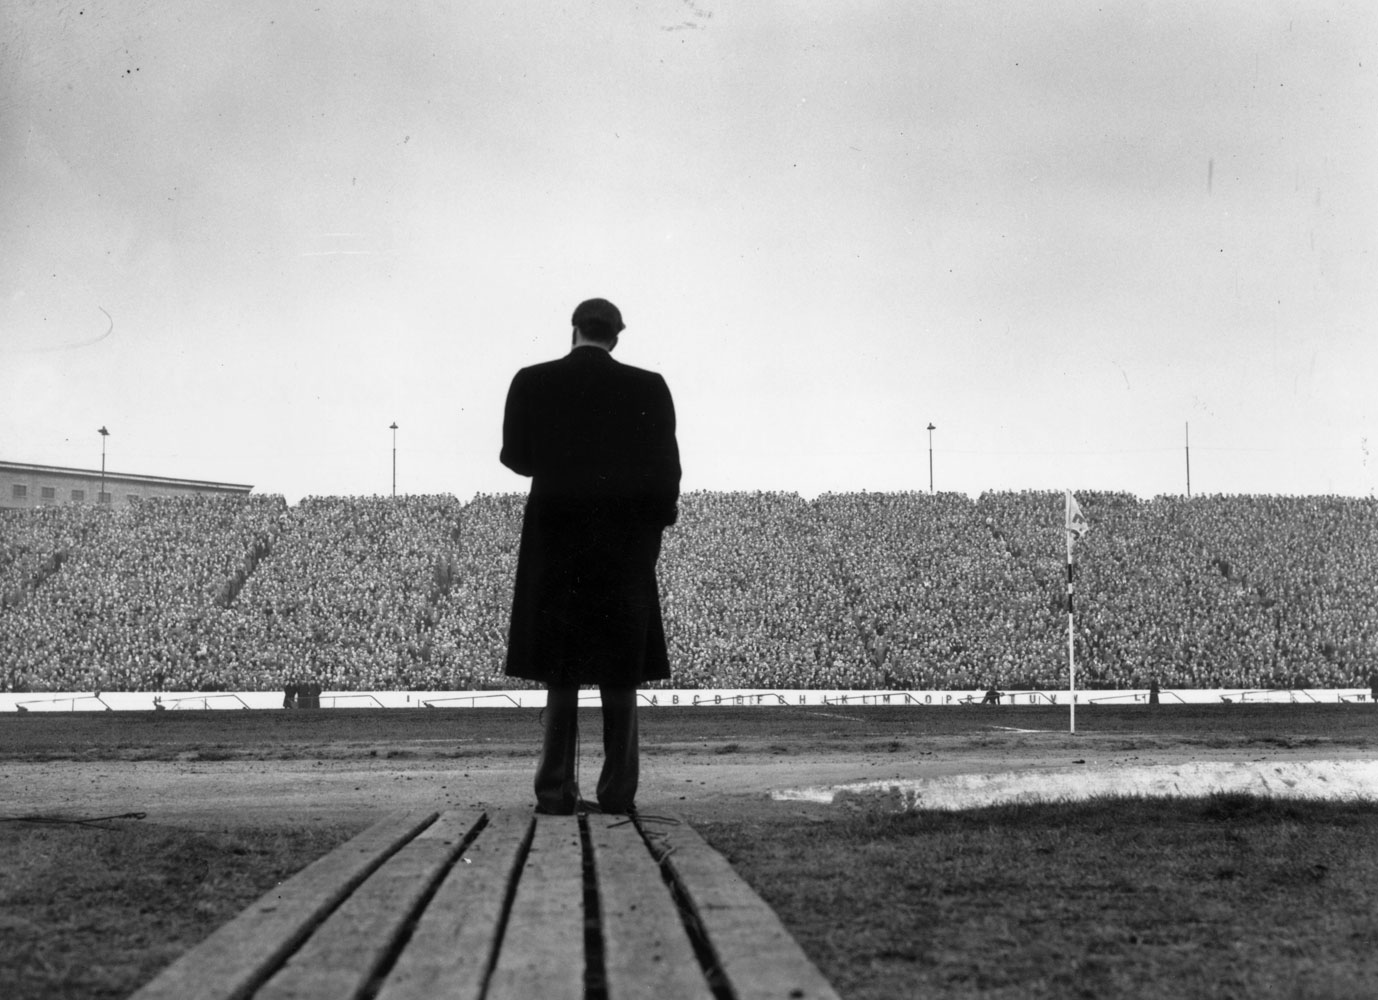 On a trip to the United Kingdom, Graham addresses a crowd of football supporters at Stamford Bridge, London, during half-time at a match between Chelsea and Newcastle United.